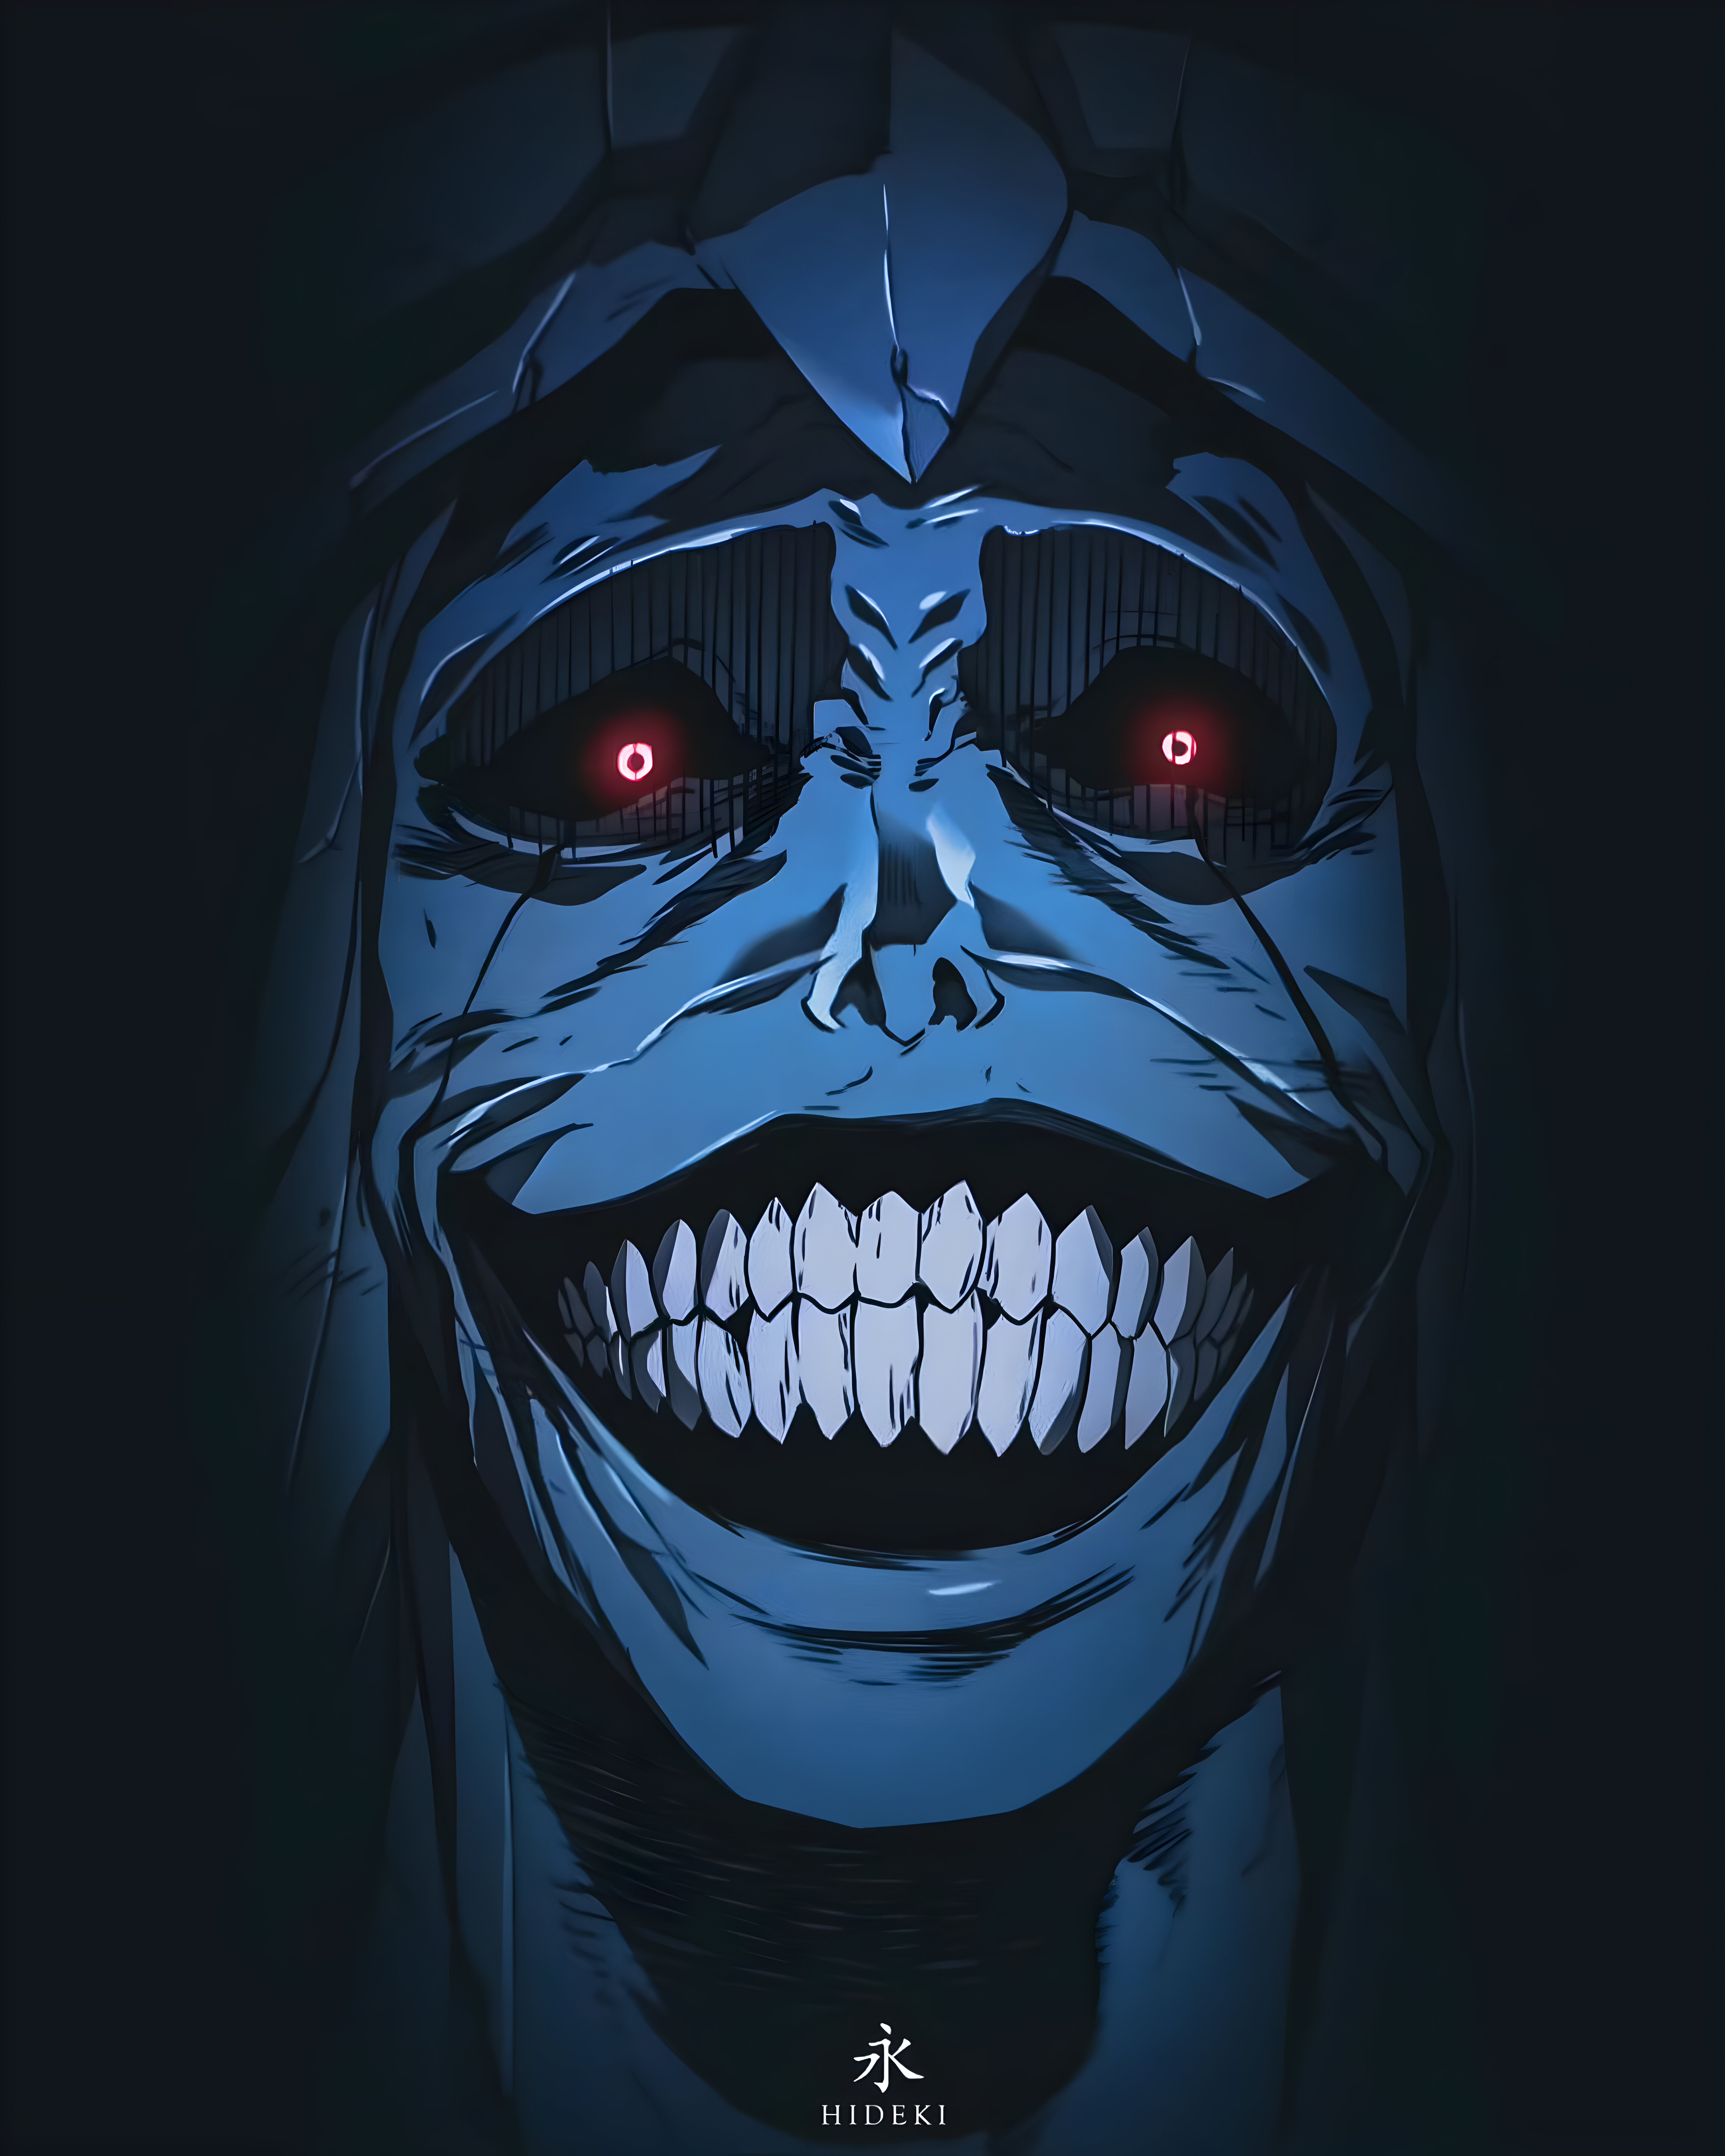 Anime 5760x7200 Solo Leveling red eyes smiling evil teeth looking at viewer face glowing eyes anime portrait display horror creepy statue